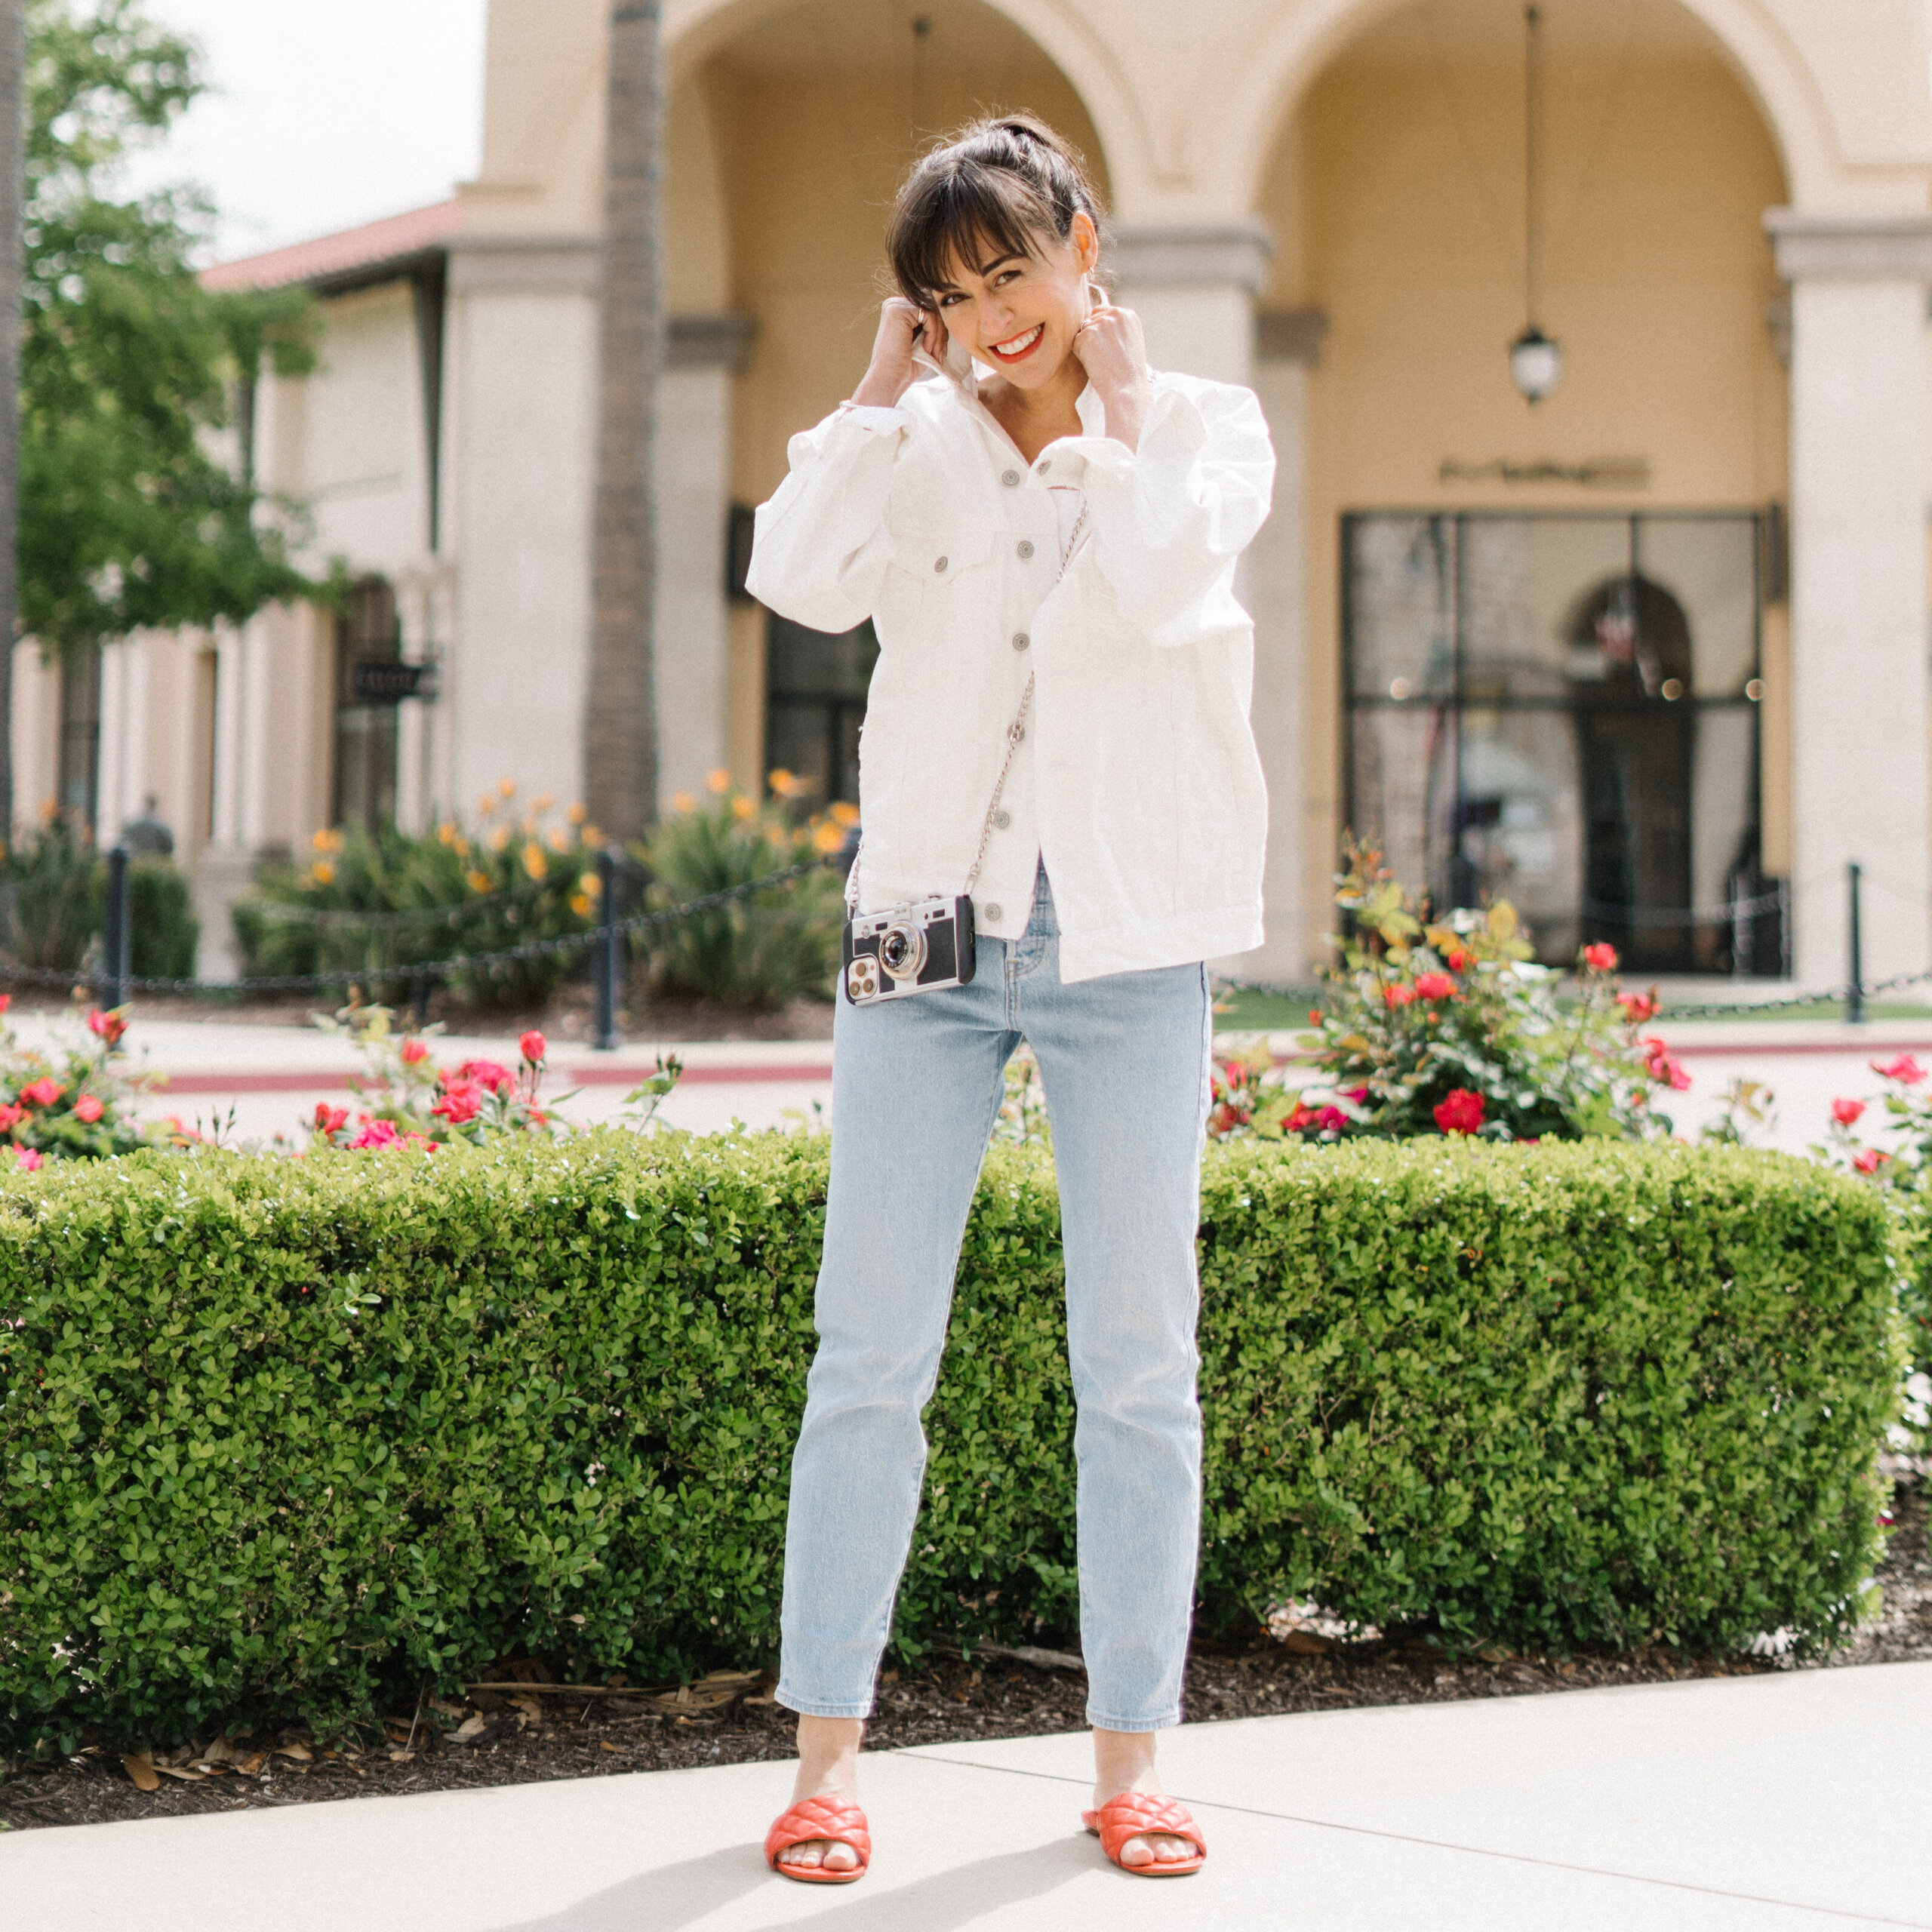 Summer Jeans Outfits | Denim is the New Black For Your Summer Wardrobe